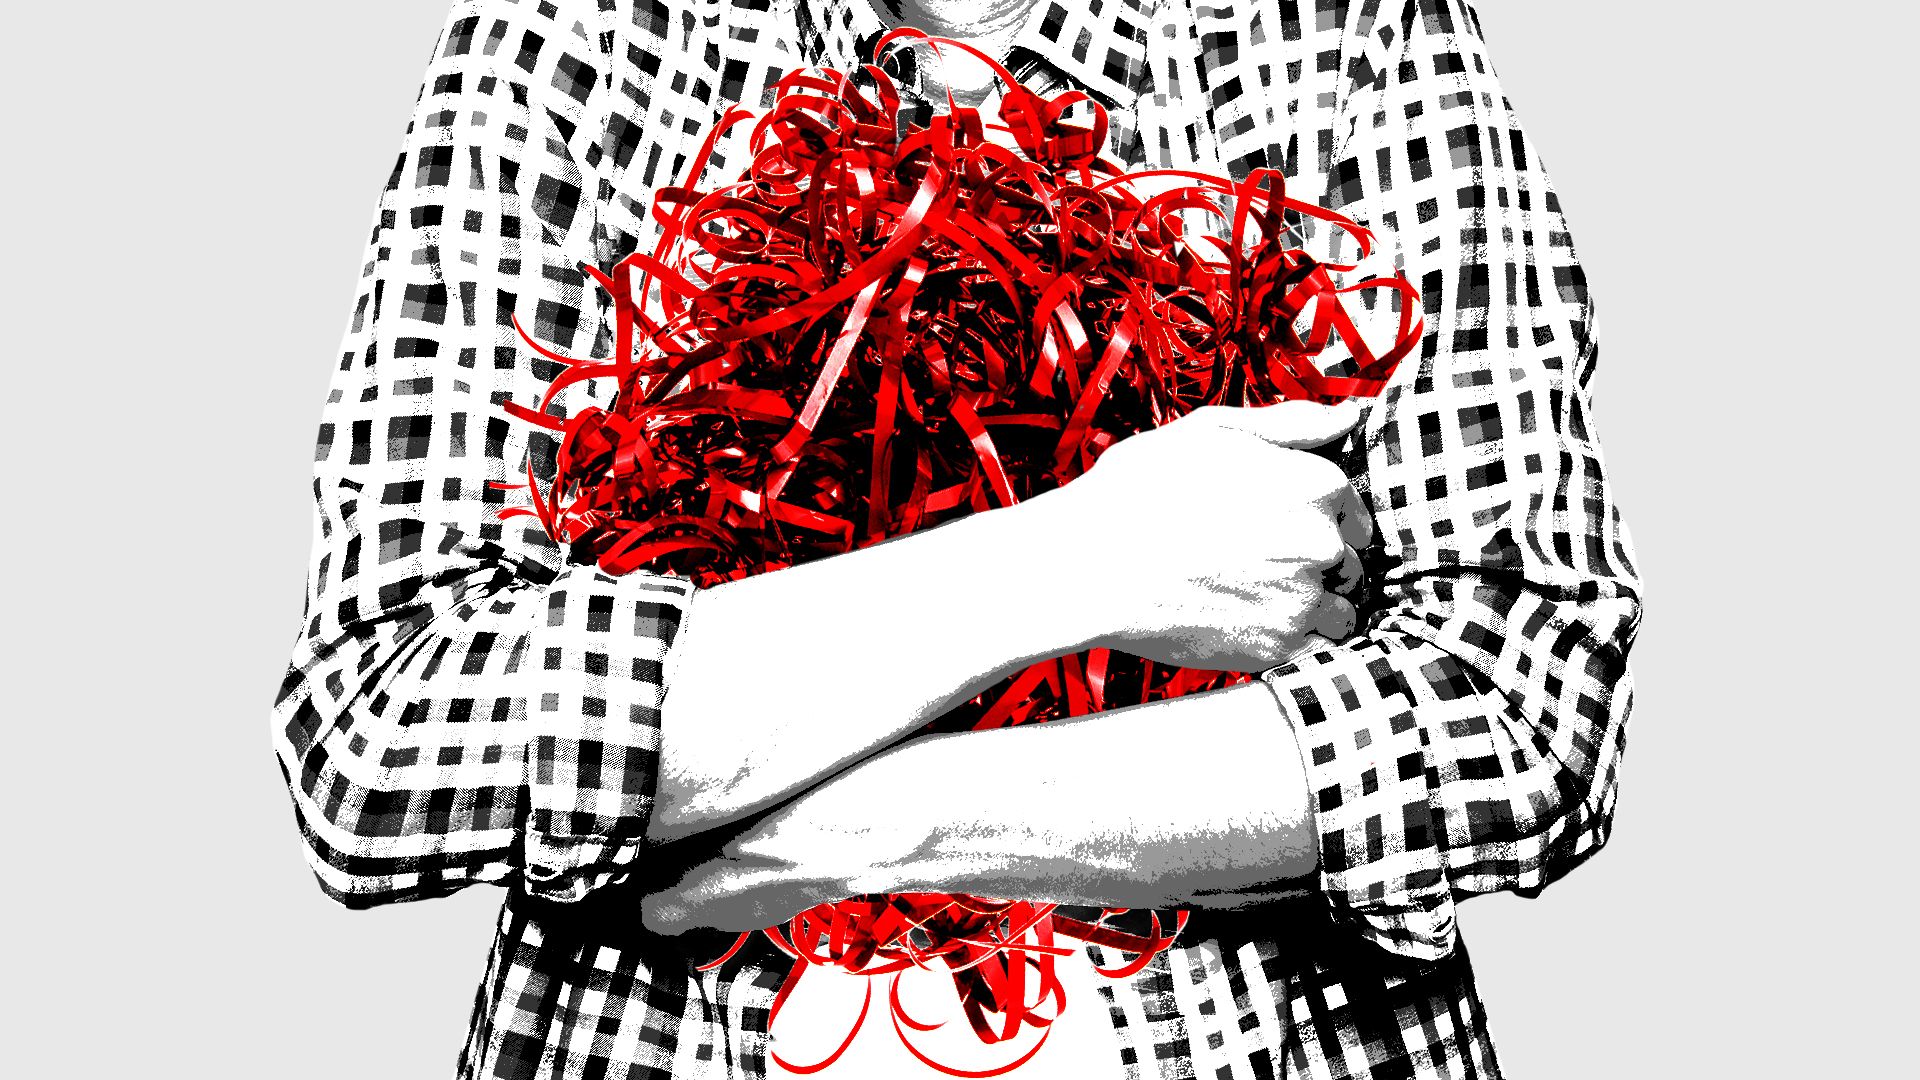 Illustration of a person holding a tangled ball of red tape